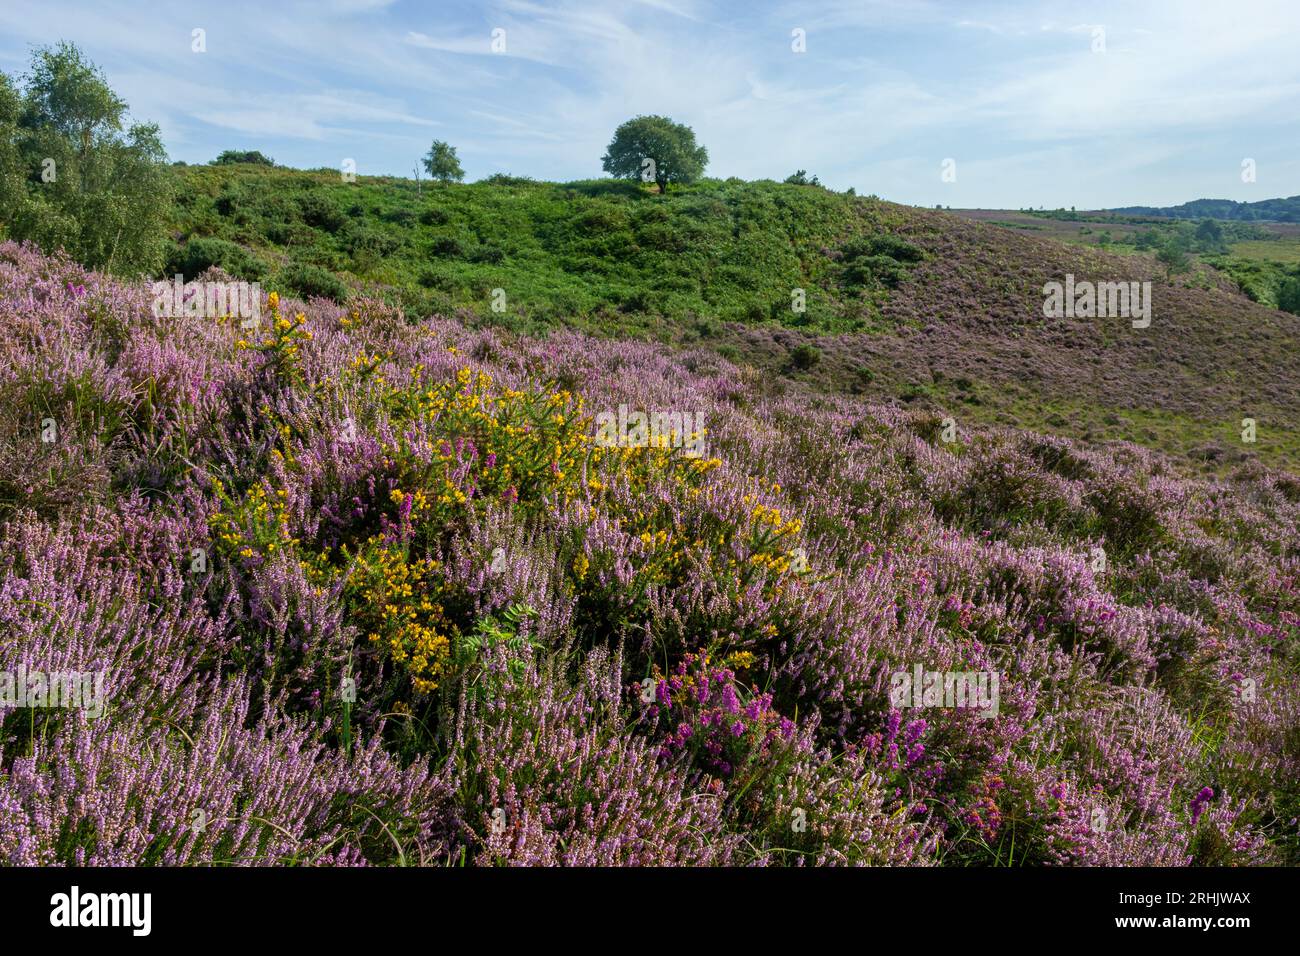 Lowland heath landscape in the New Forest National Park, Hampshire, England, UK, with pink purple heather flowering in summer Stock Photo